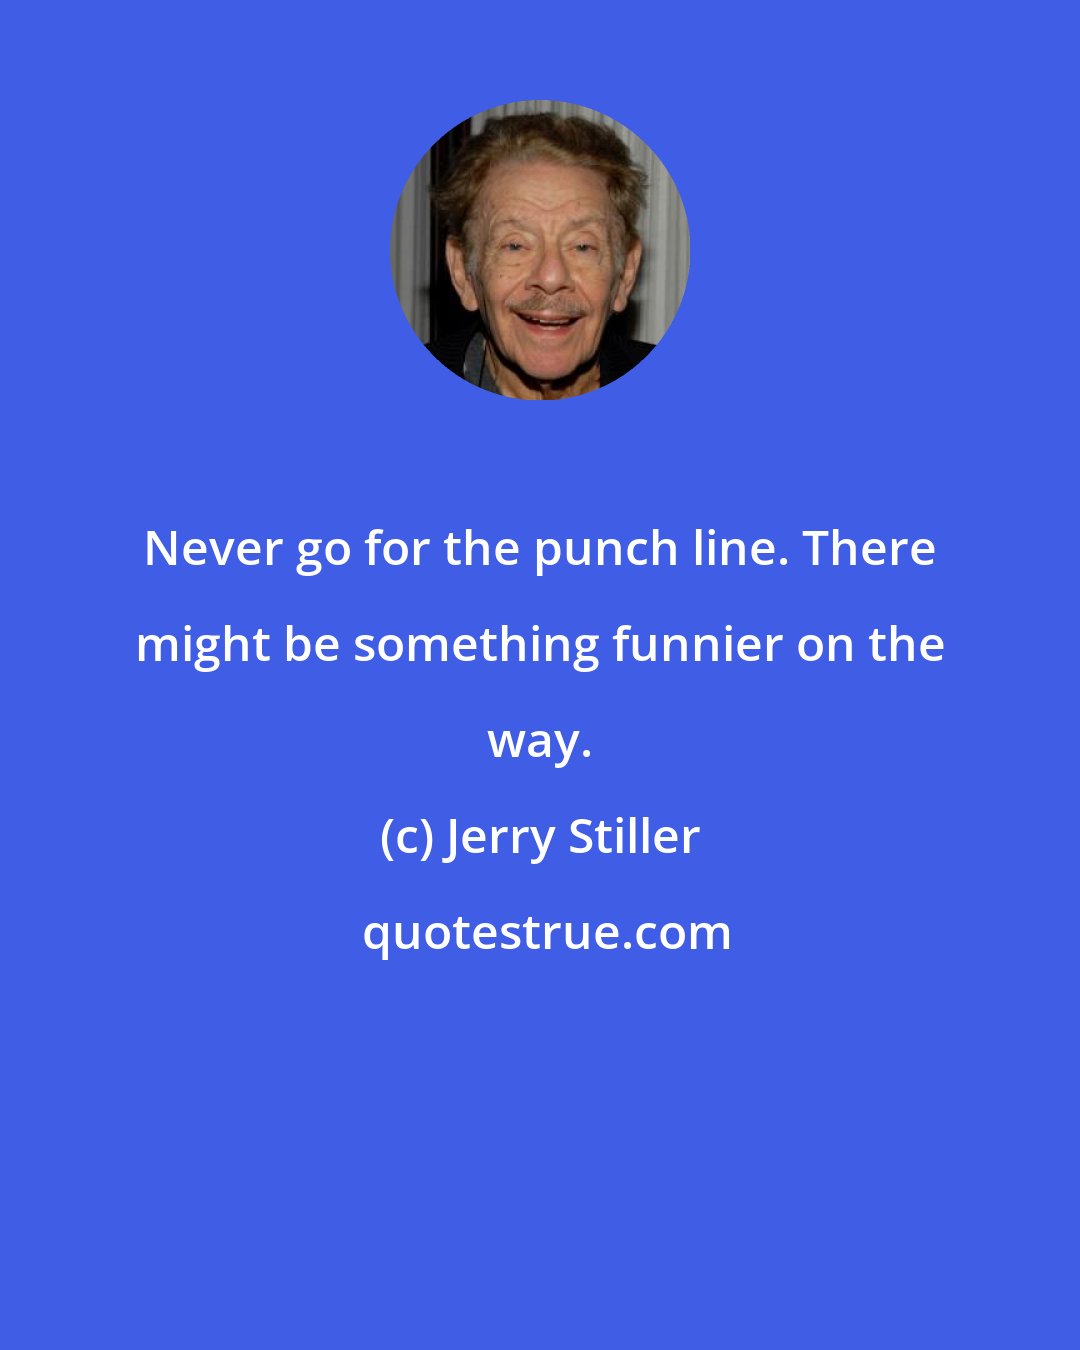 Jerry Stiller: Never go for the punch line. There might be something funnier on the way.